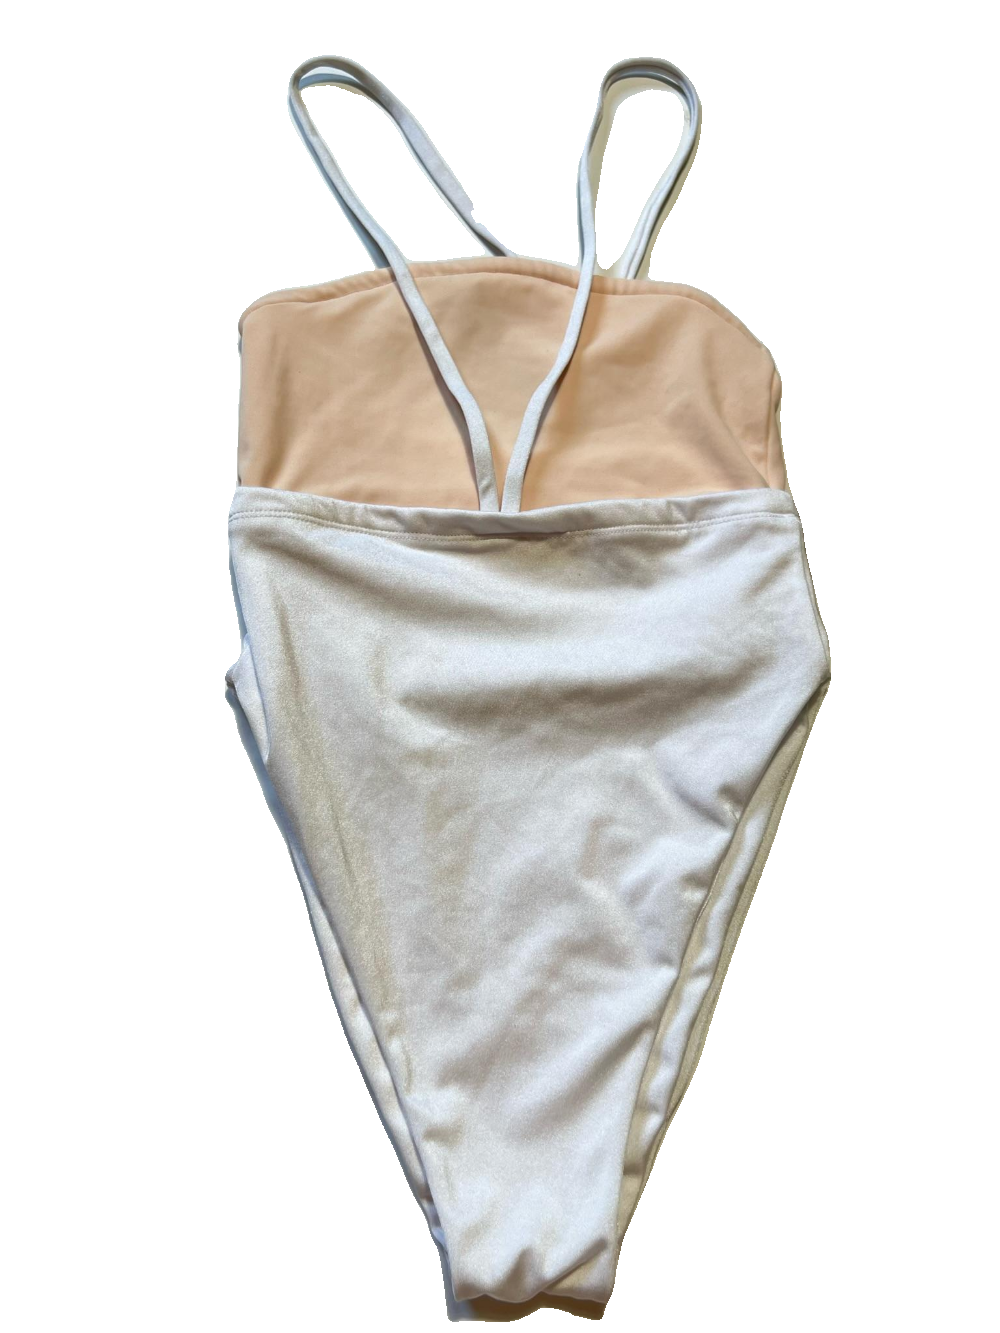 One Swimming - Beige One Piece - NEW WITH TAGS